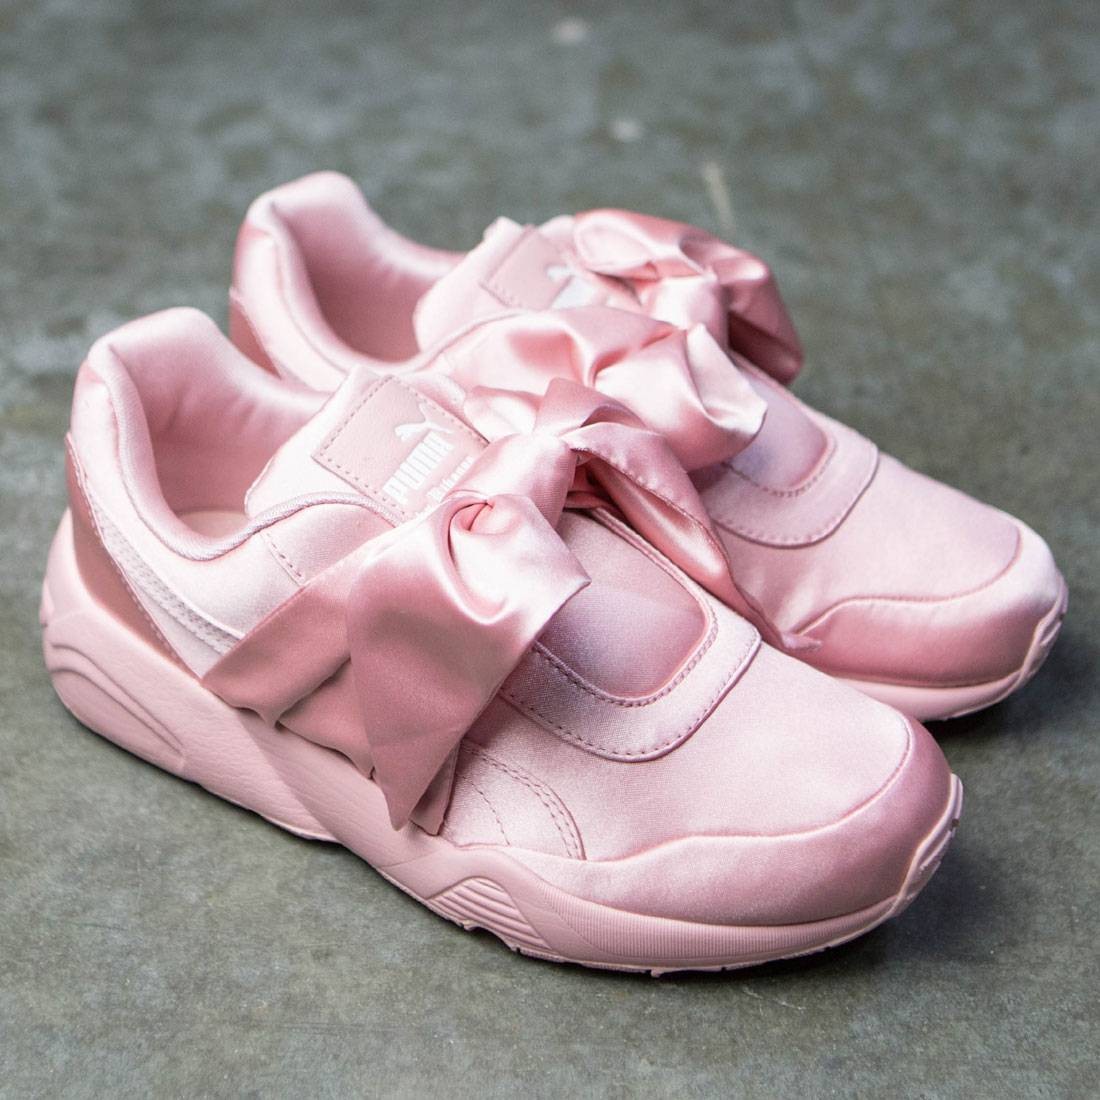 puma pink sneakers with bow